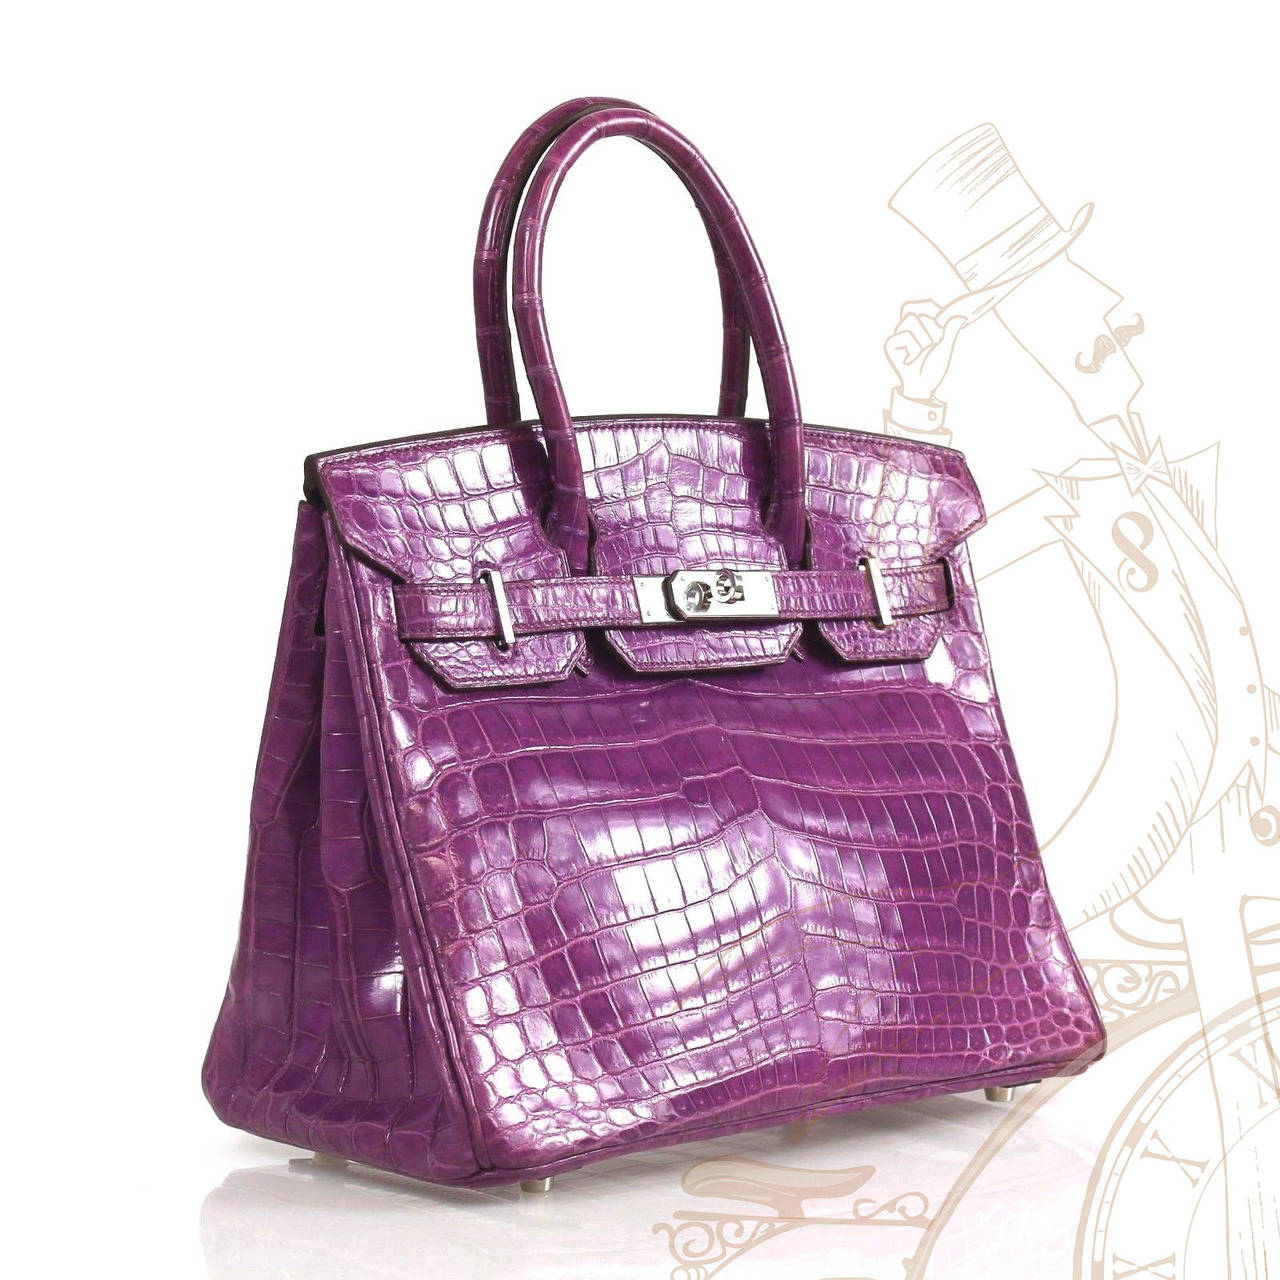 This is an authentic Hermes Shiny Porosus Crocodile Purple Birkin 30 cm. This Birkin Porosus crocodile in bright purple with contrasting crocodile trim found at the piping, side gussets, top handles and straps. The bag features rolled crocodile top